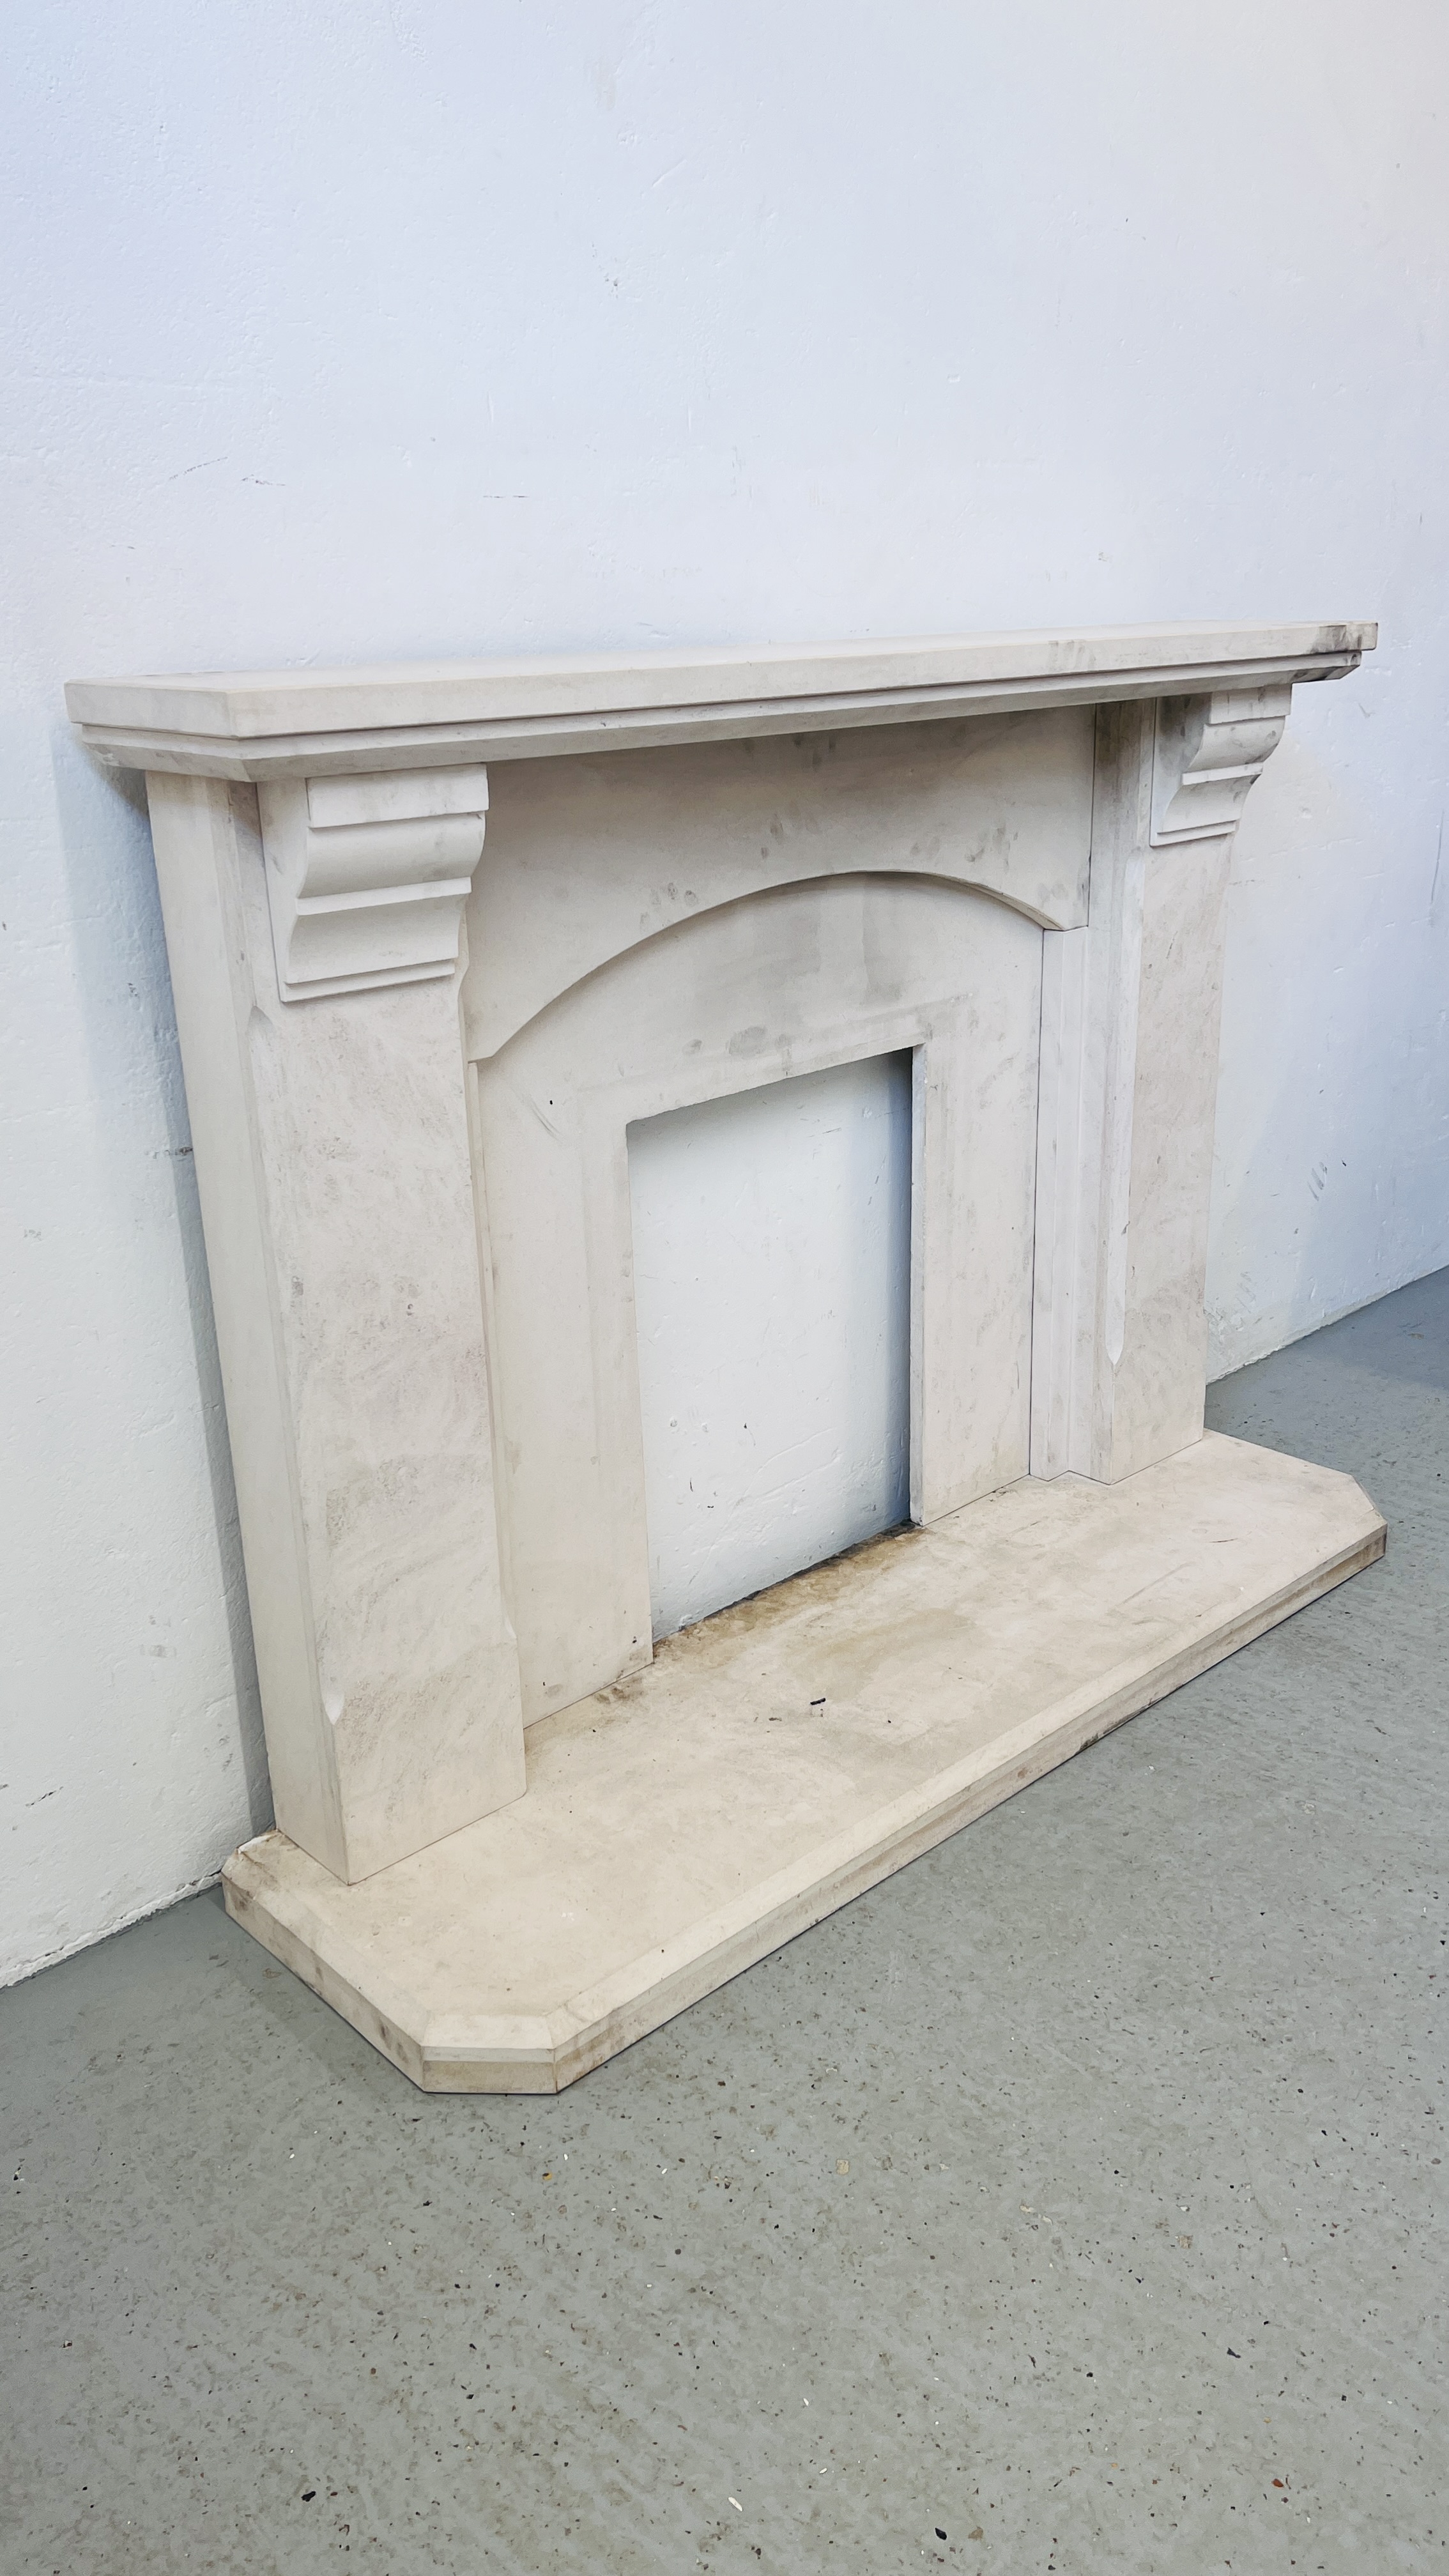 A MODERN STONE FIRE SURROUND COMPLETE WITH HEARTH, HEARTH WIDTH 137CM, DEPTH 39CM. - Image 3 of 12